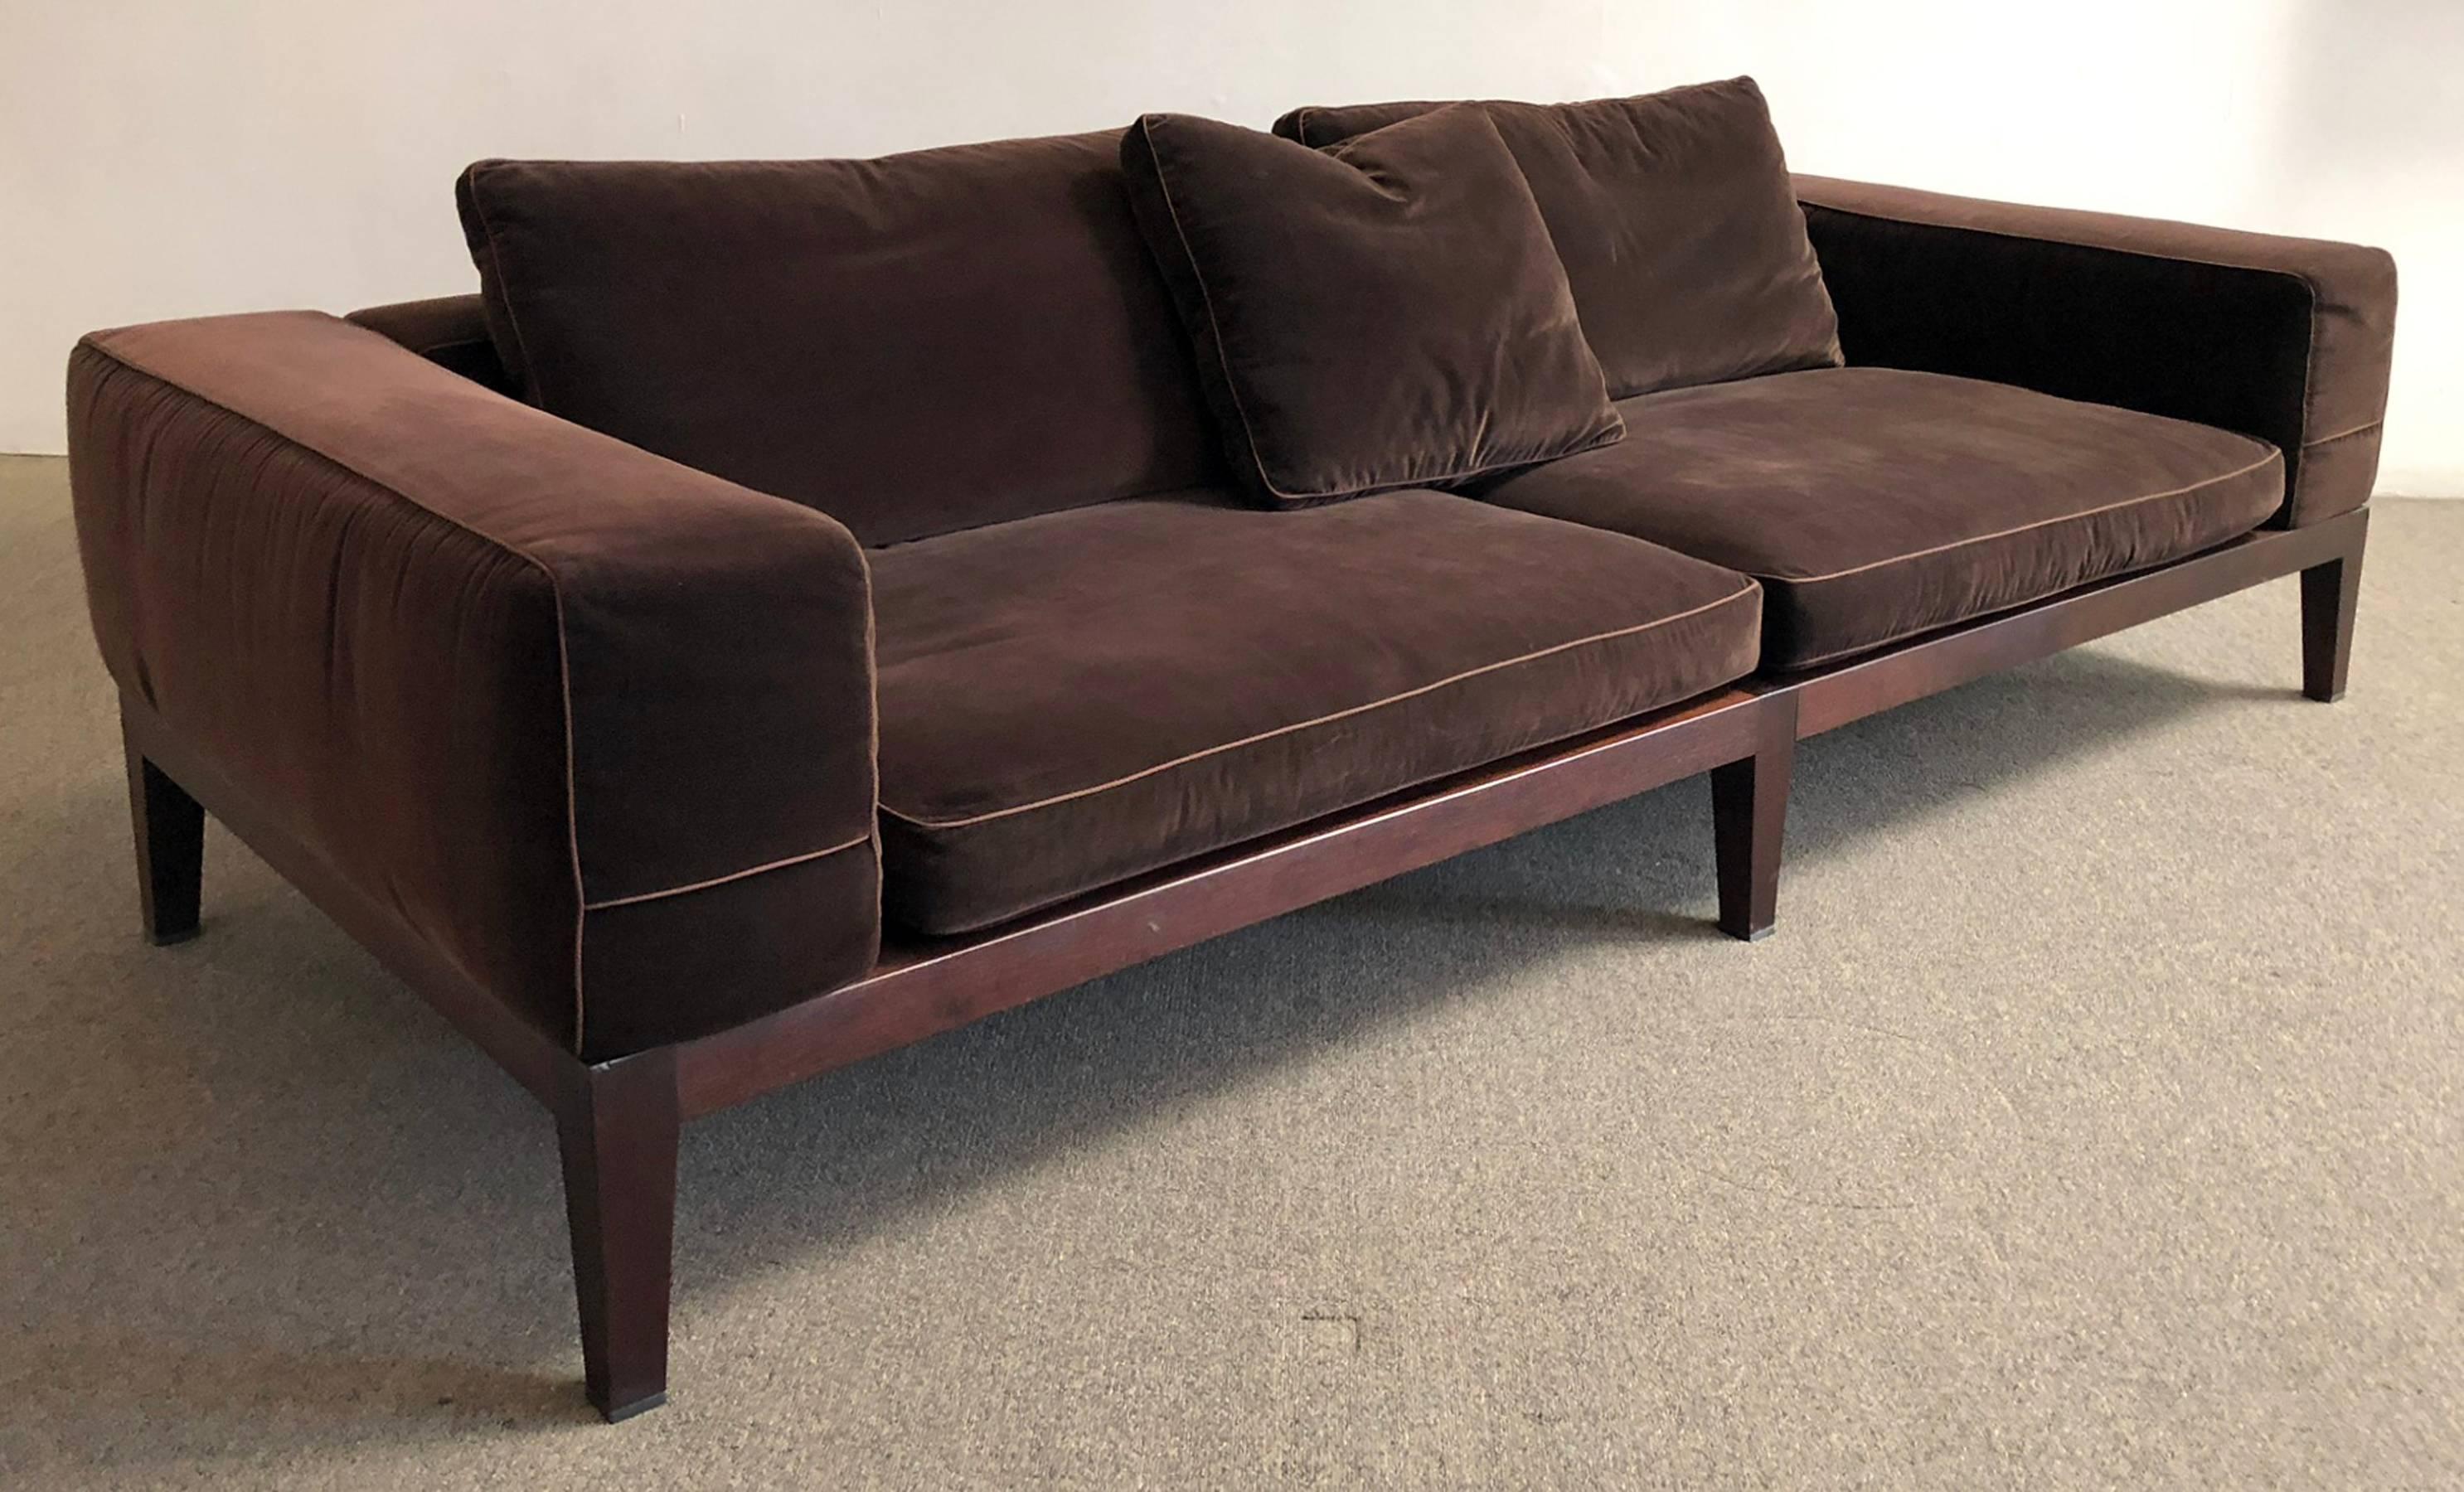 Flexform / made in Italy. Sofa designed by Antonio Citterio. Finished wood legs with plush velvet upholstery. Designed for comfort.